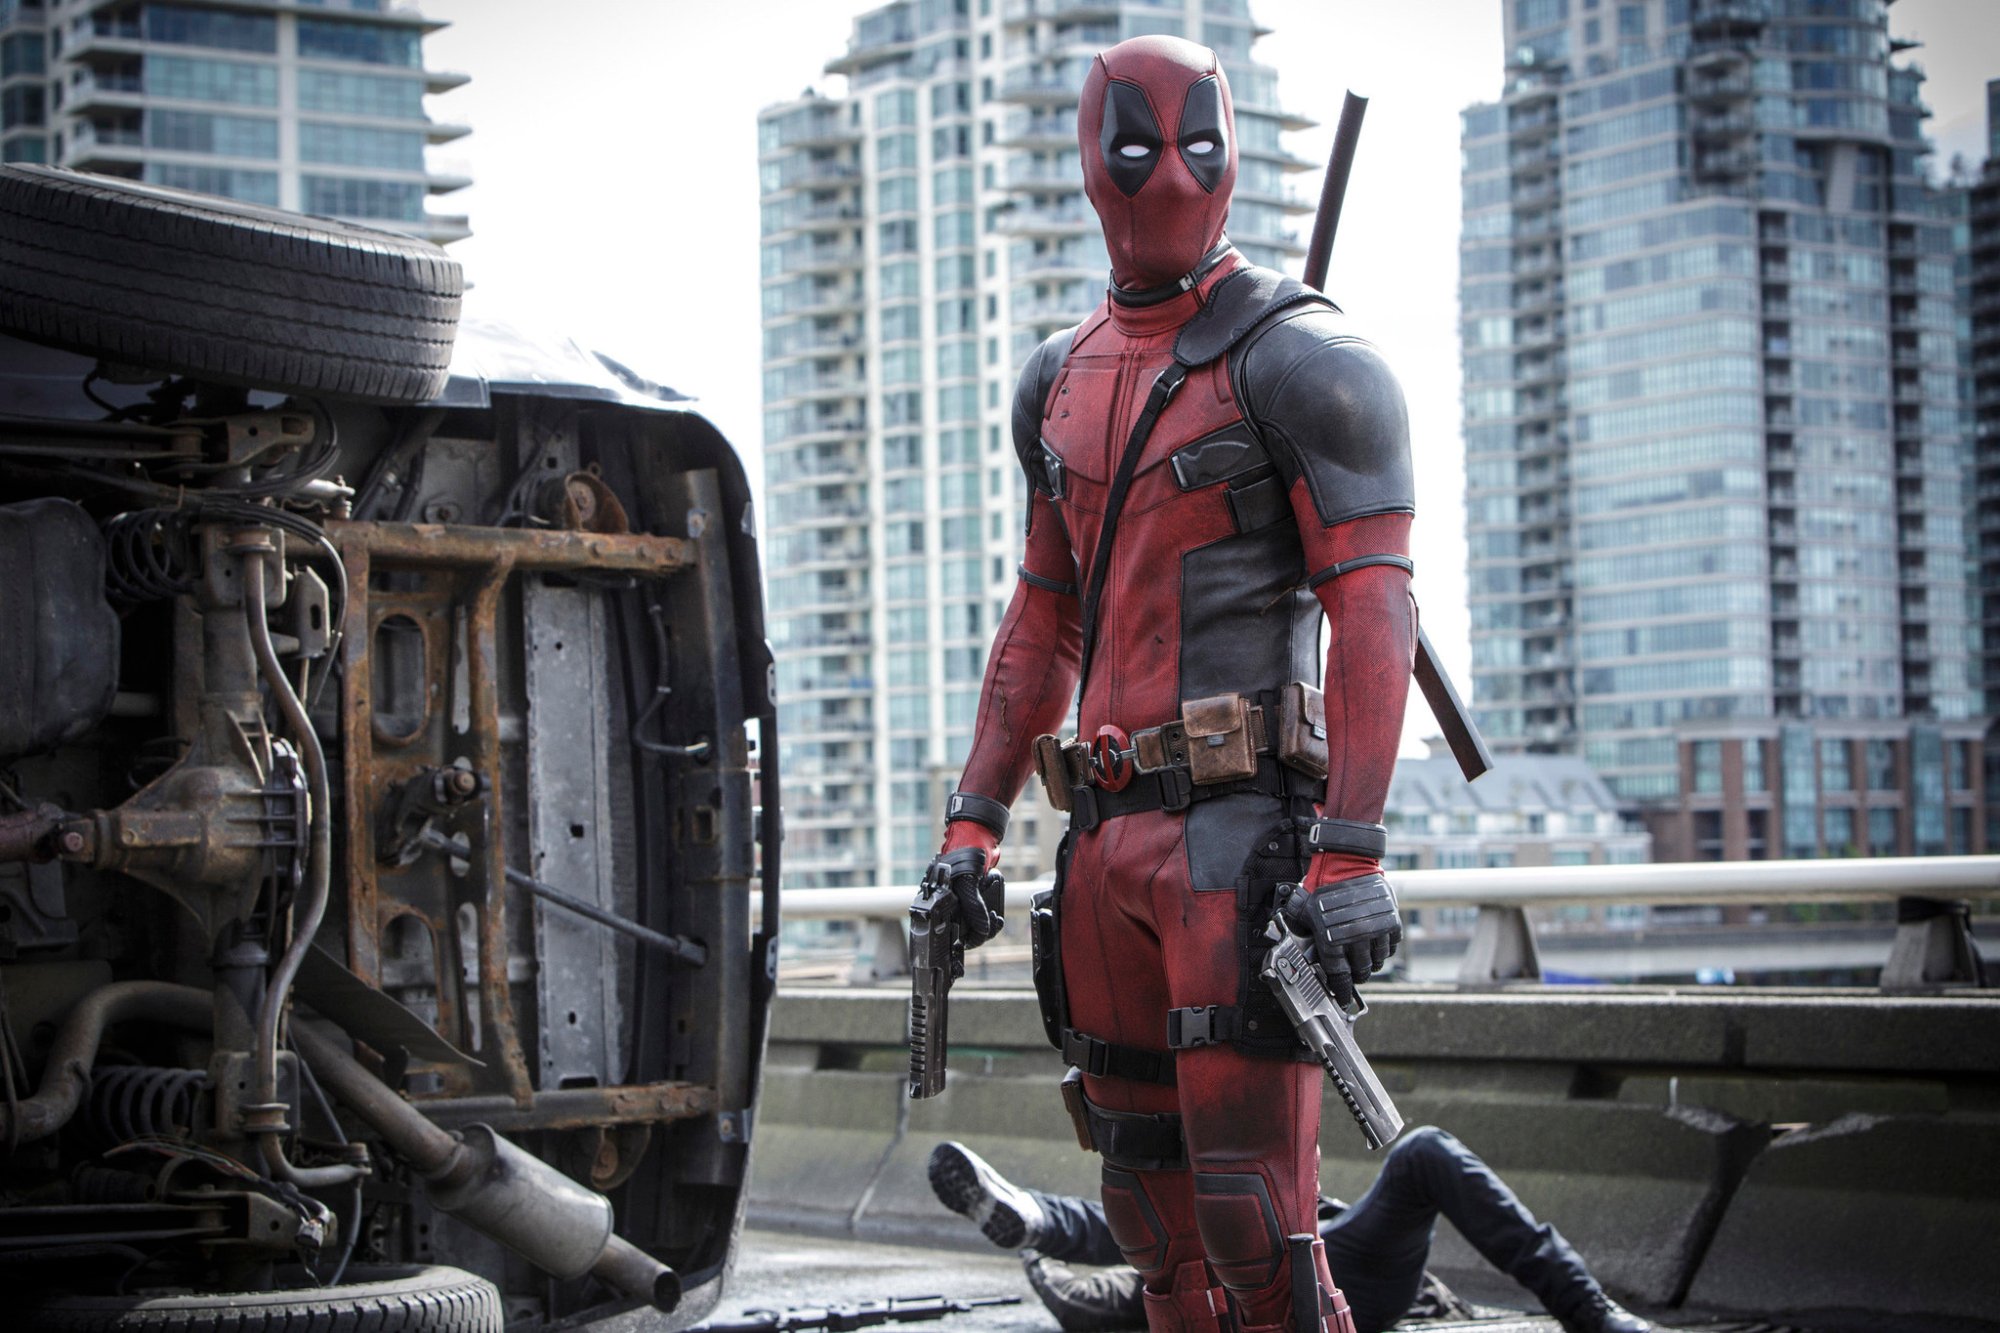 'Deadpool': Ryan Reynolds as Deadpool in costume, holding a gun in front of a flipped over car